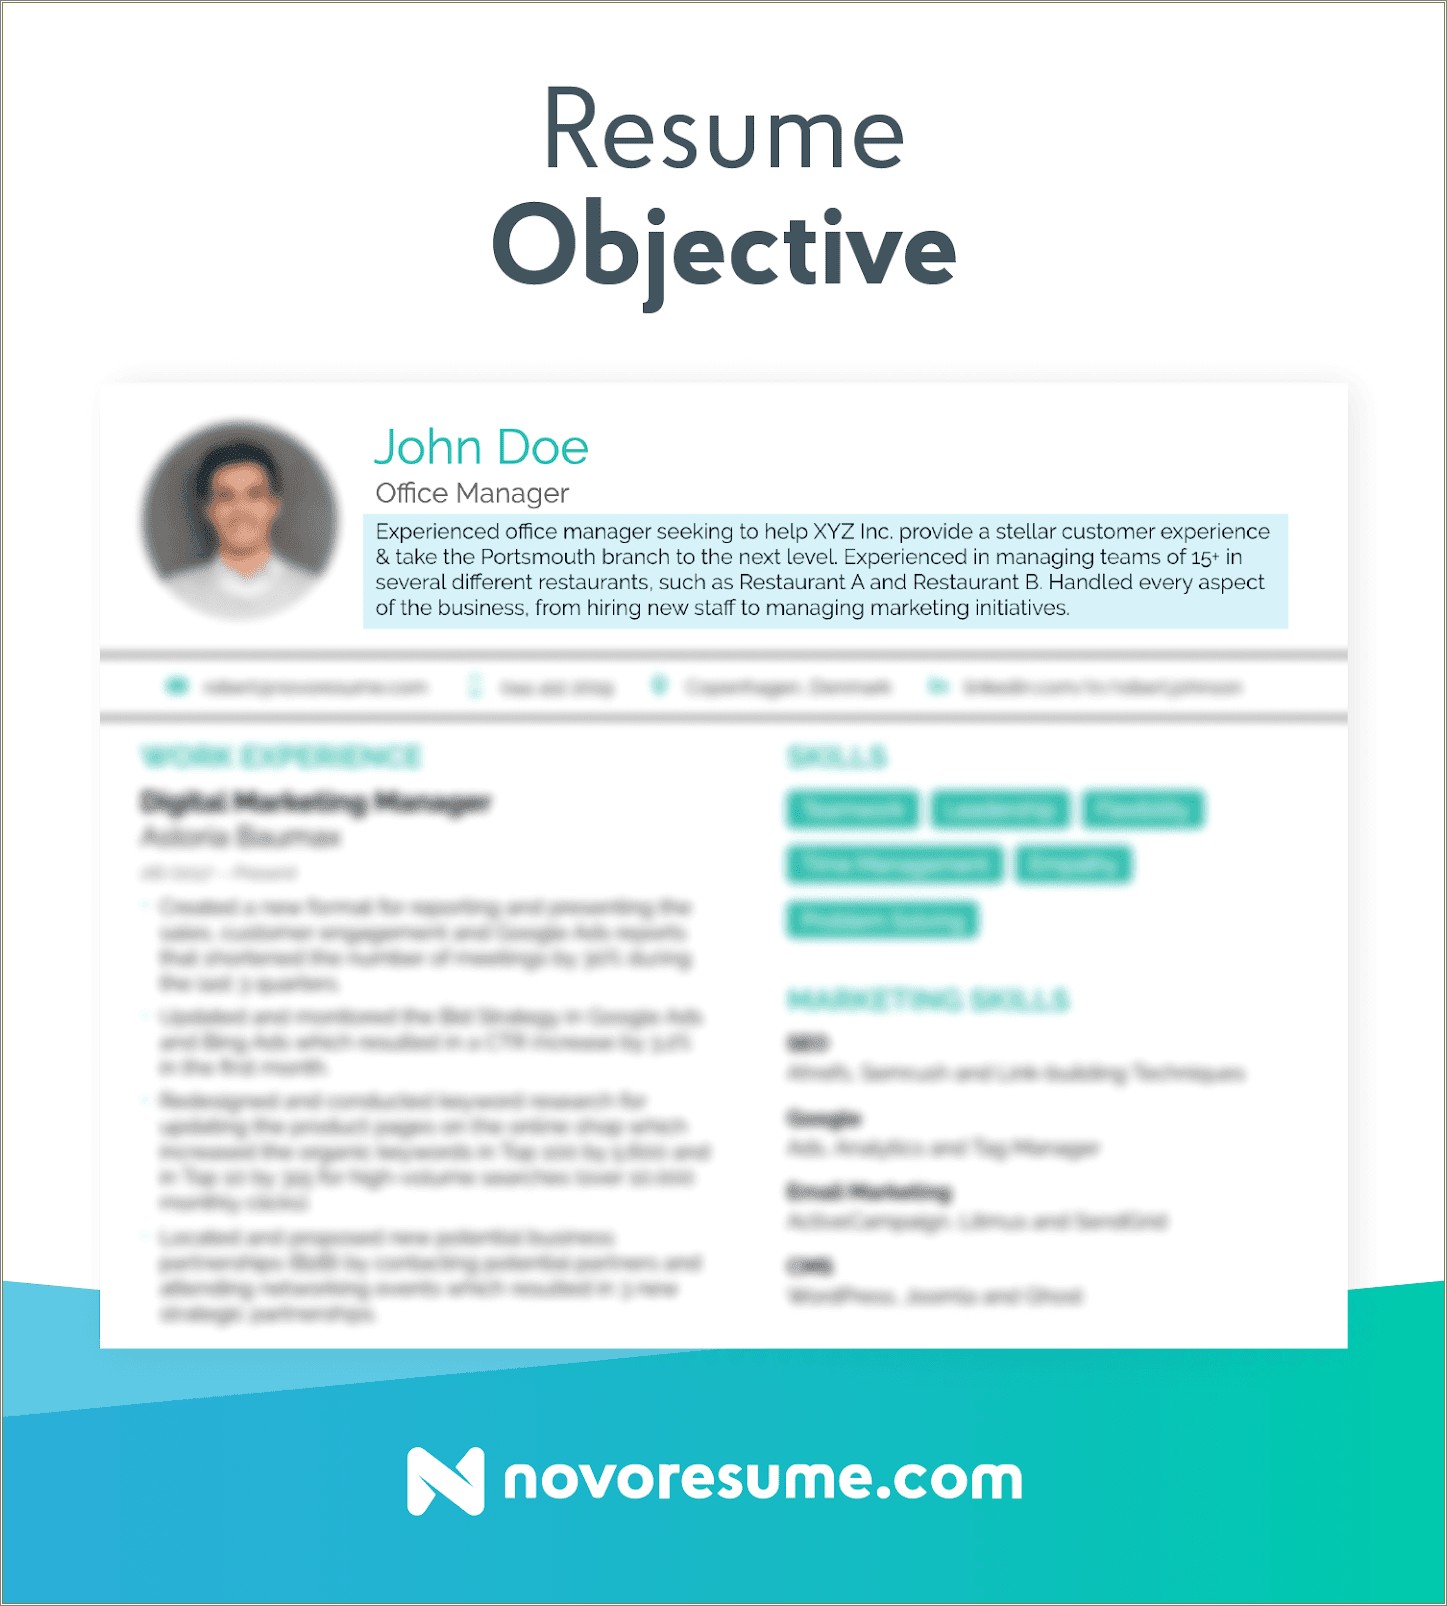 Sample Objective Statements For Business Resumes